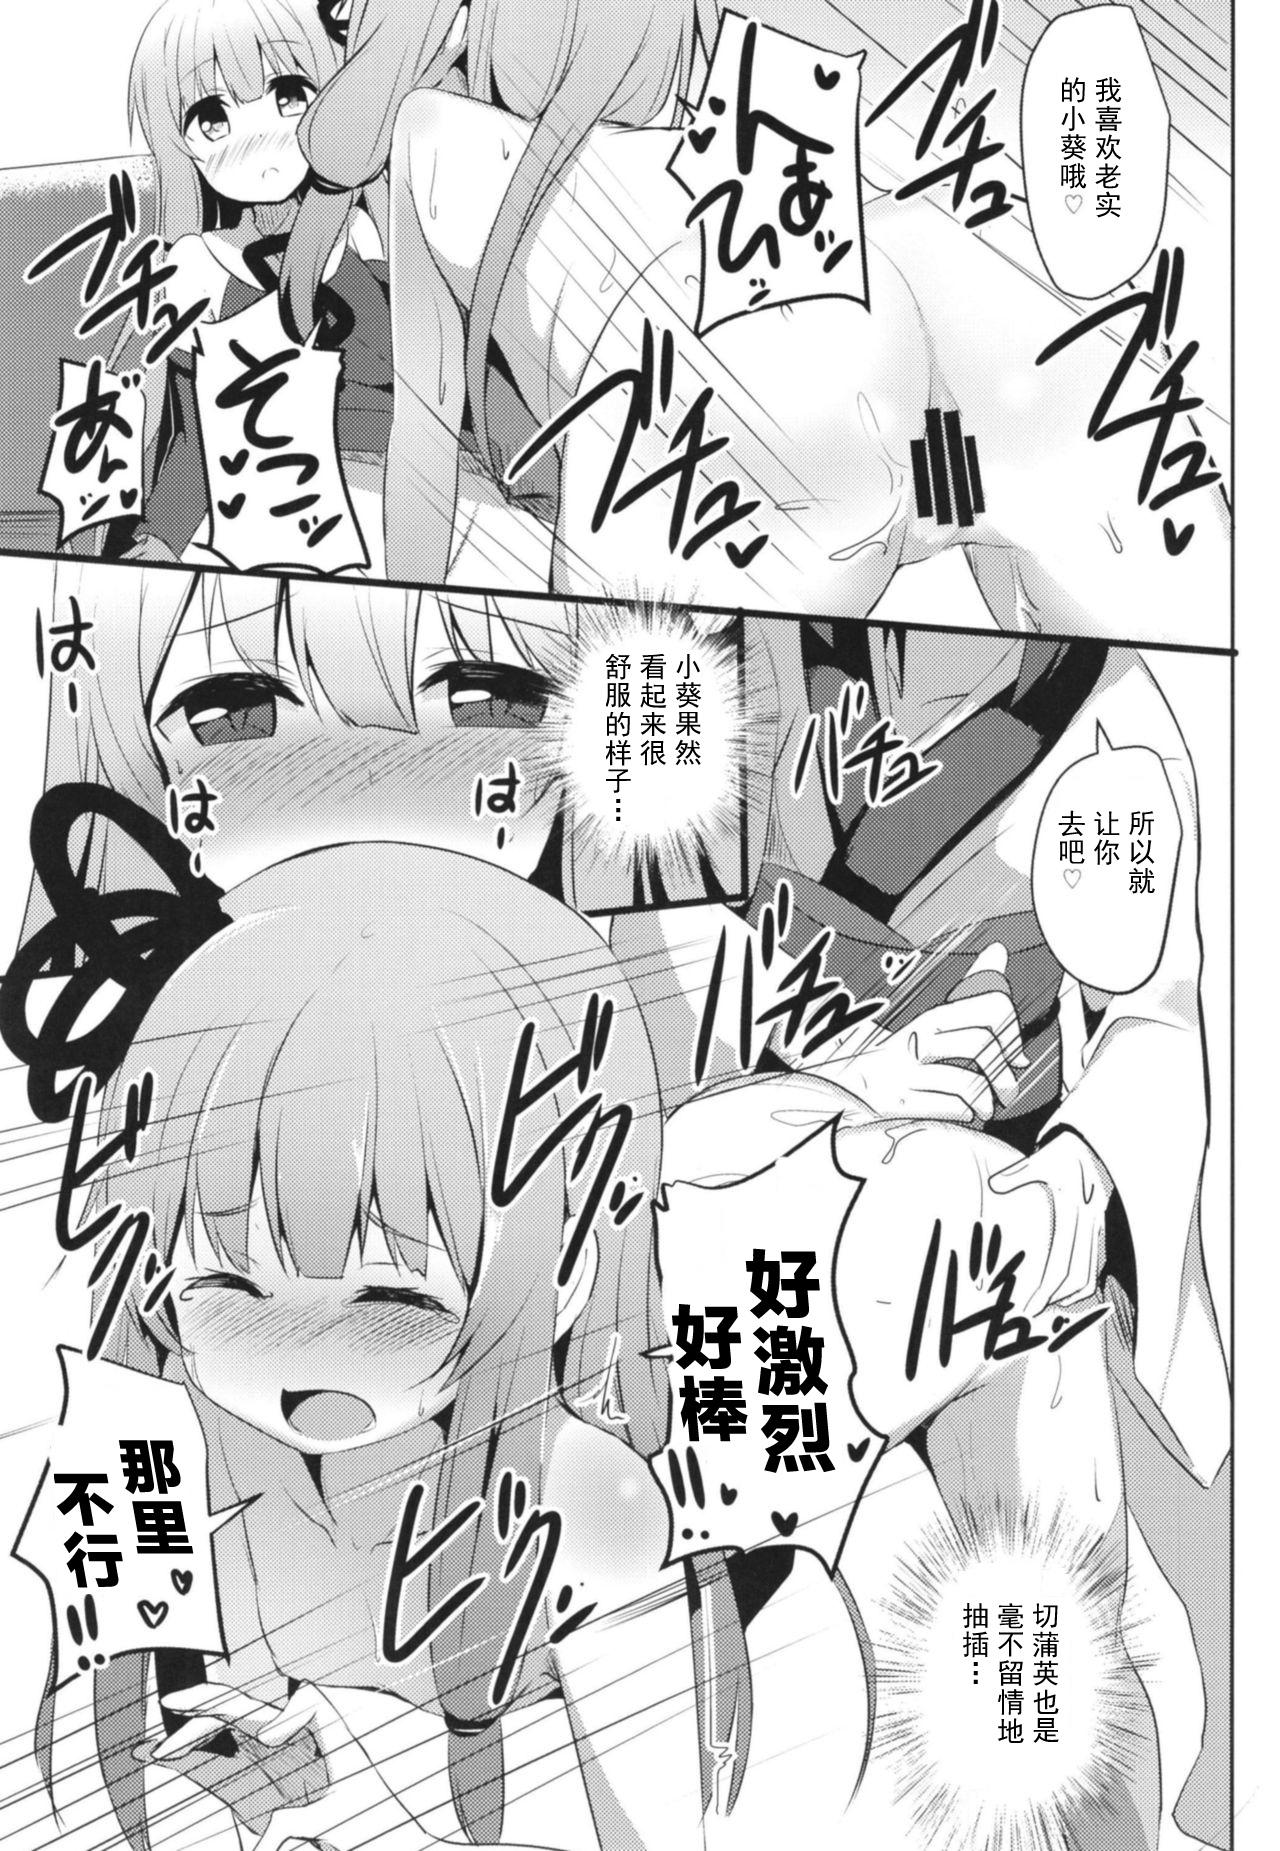 Blackcocks [Milk Pudding (Jamcy)] Akane-chan Challenge! 4-kaime (VOICEROID) [Chinese] [古早个人汉化] [Digital] - Voiceroid Pain - Page 11